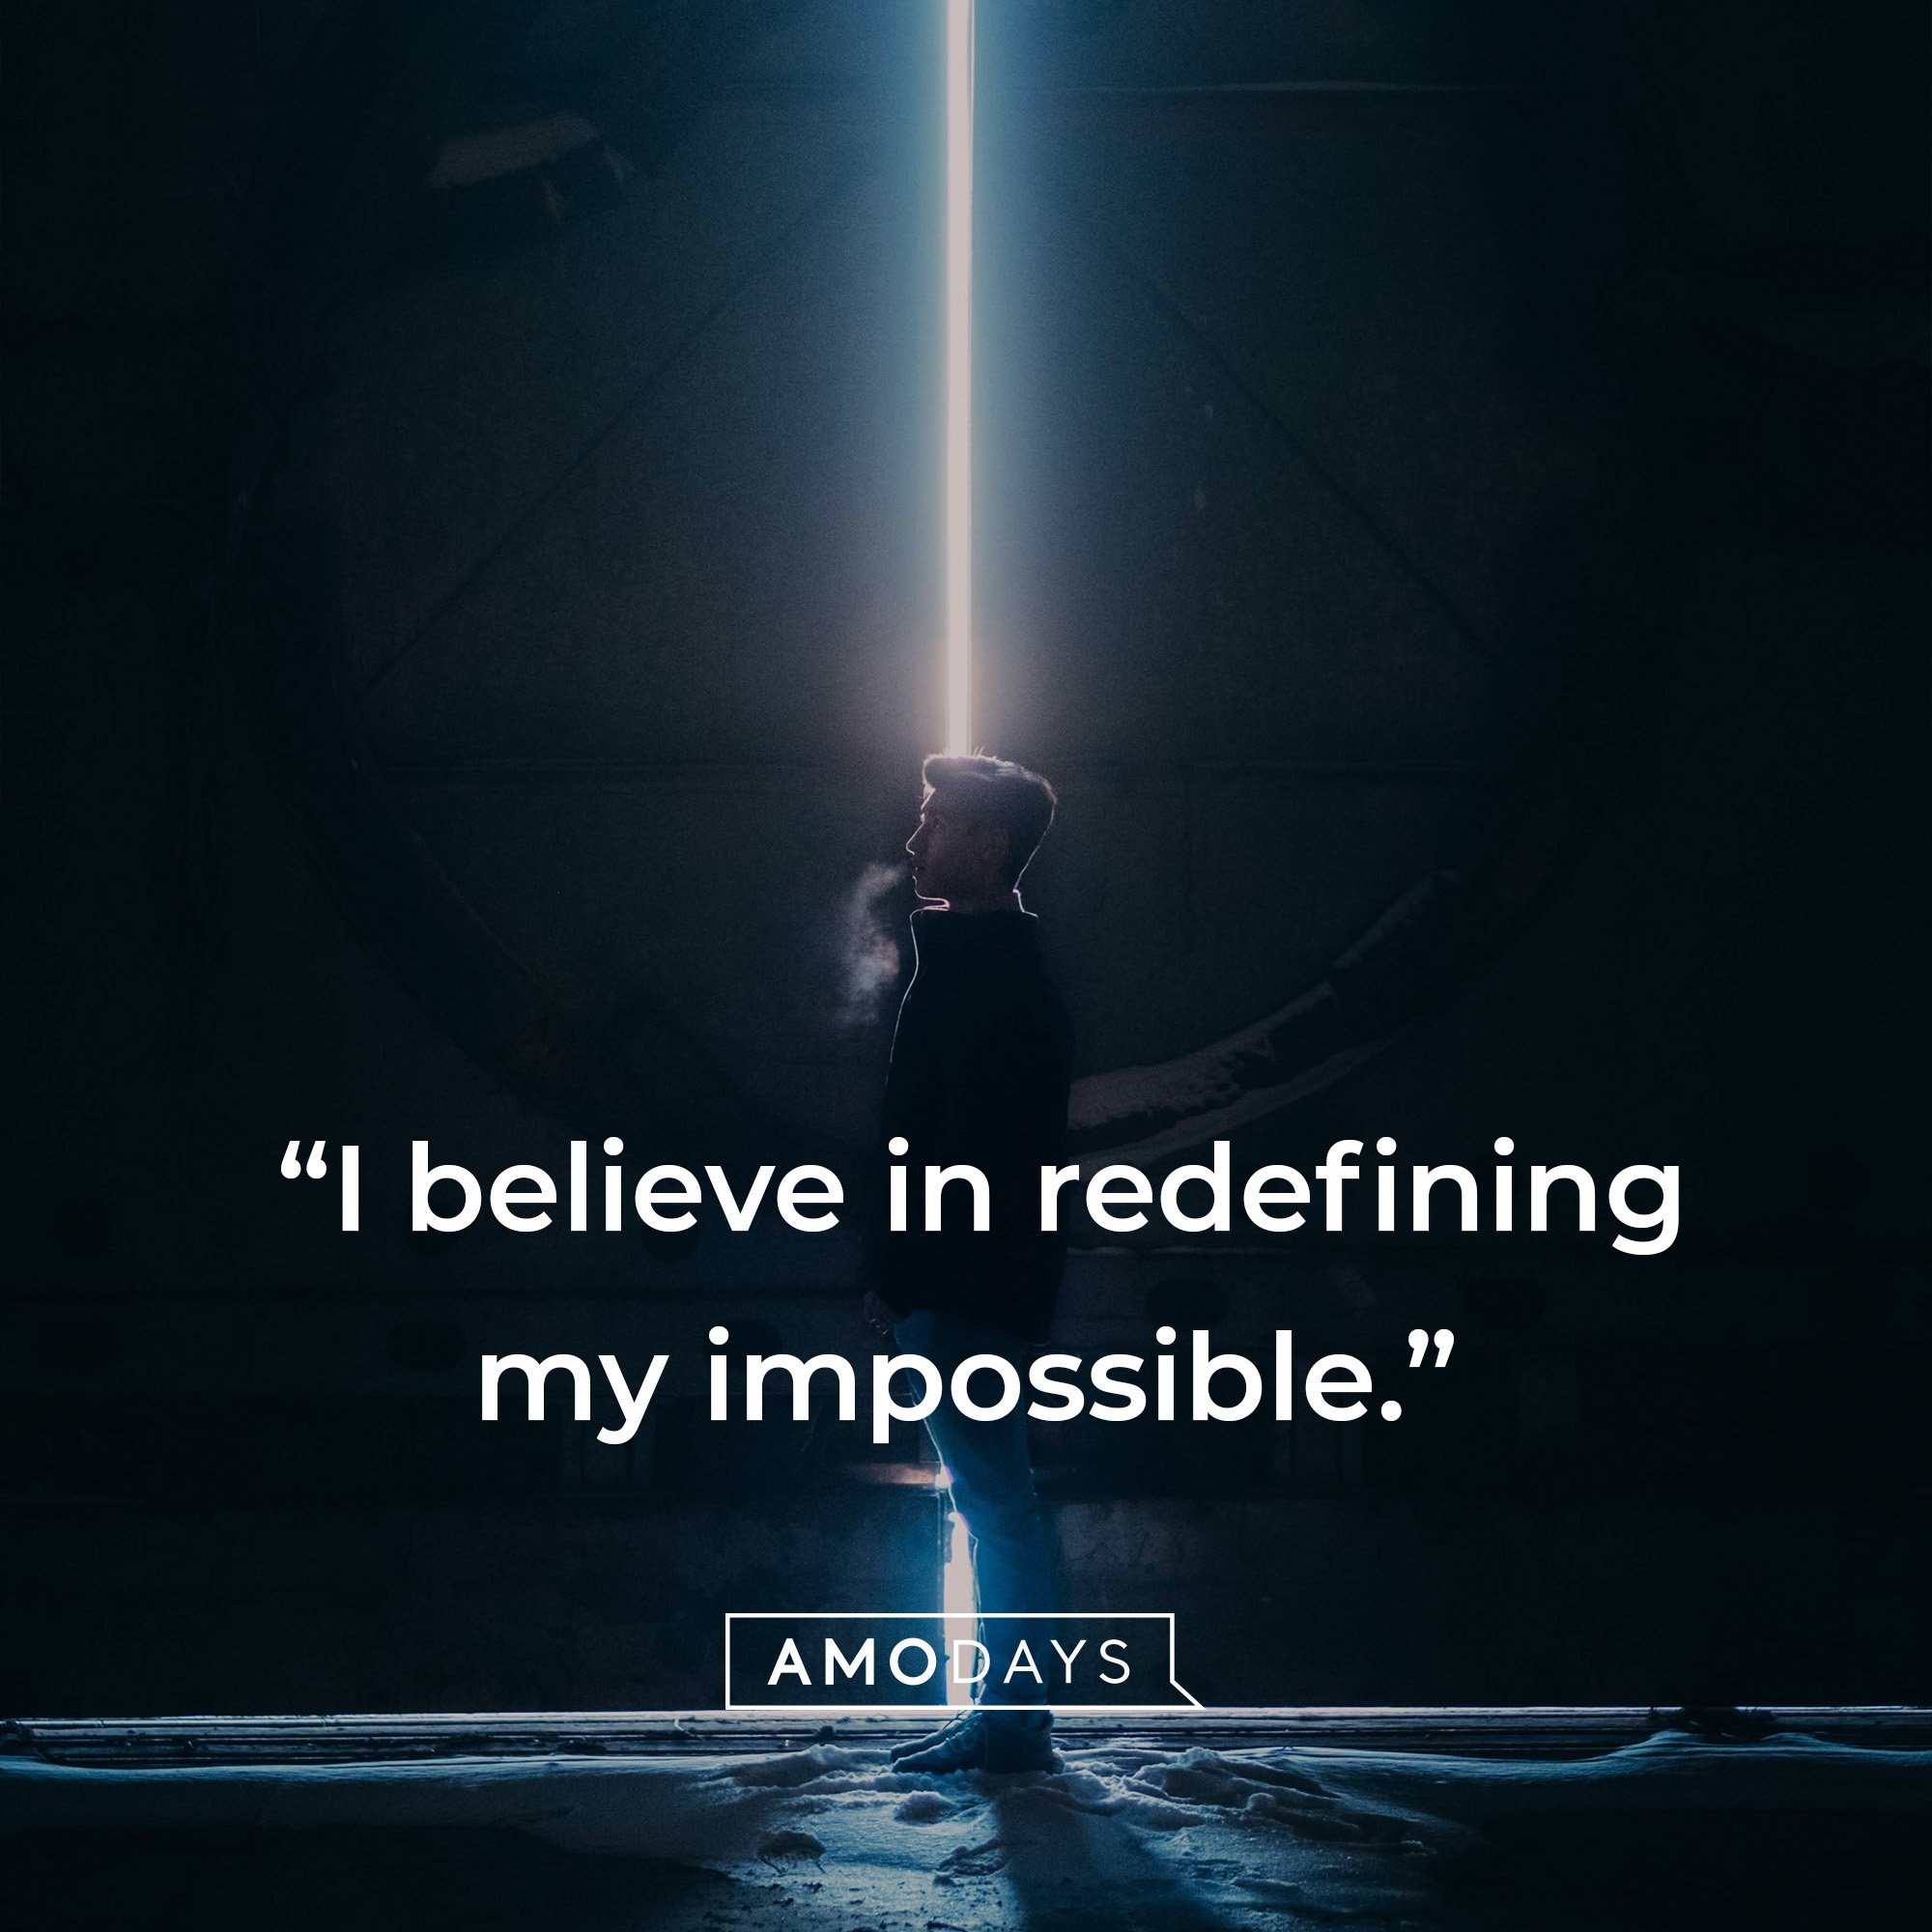 Nike’s quote: “I believe in redefining my impossible.” | Source: AmoDays